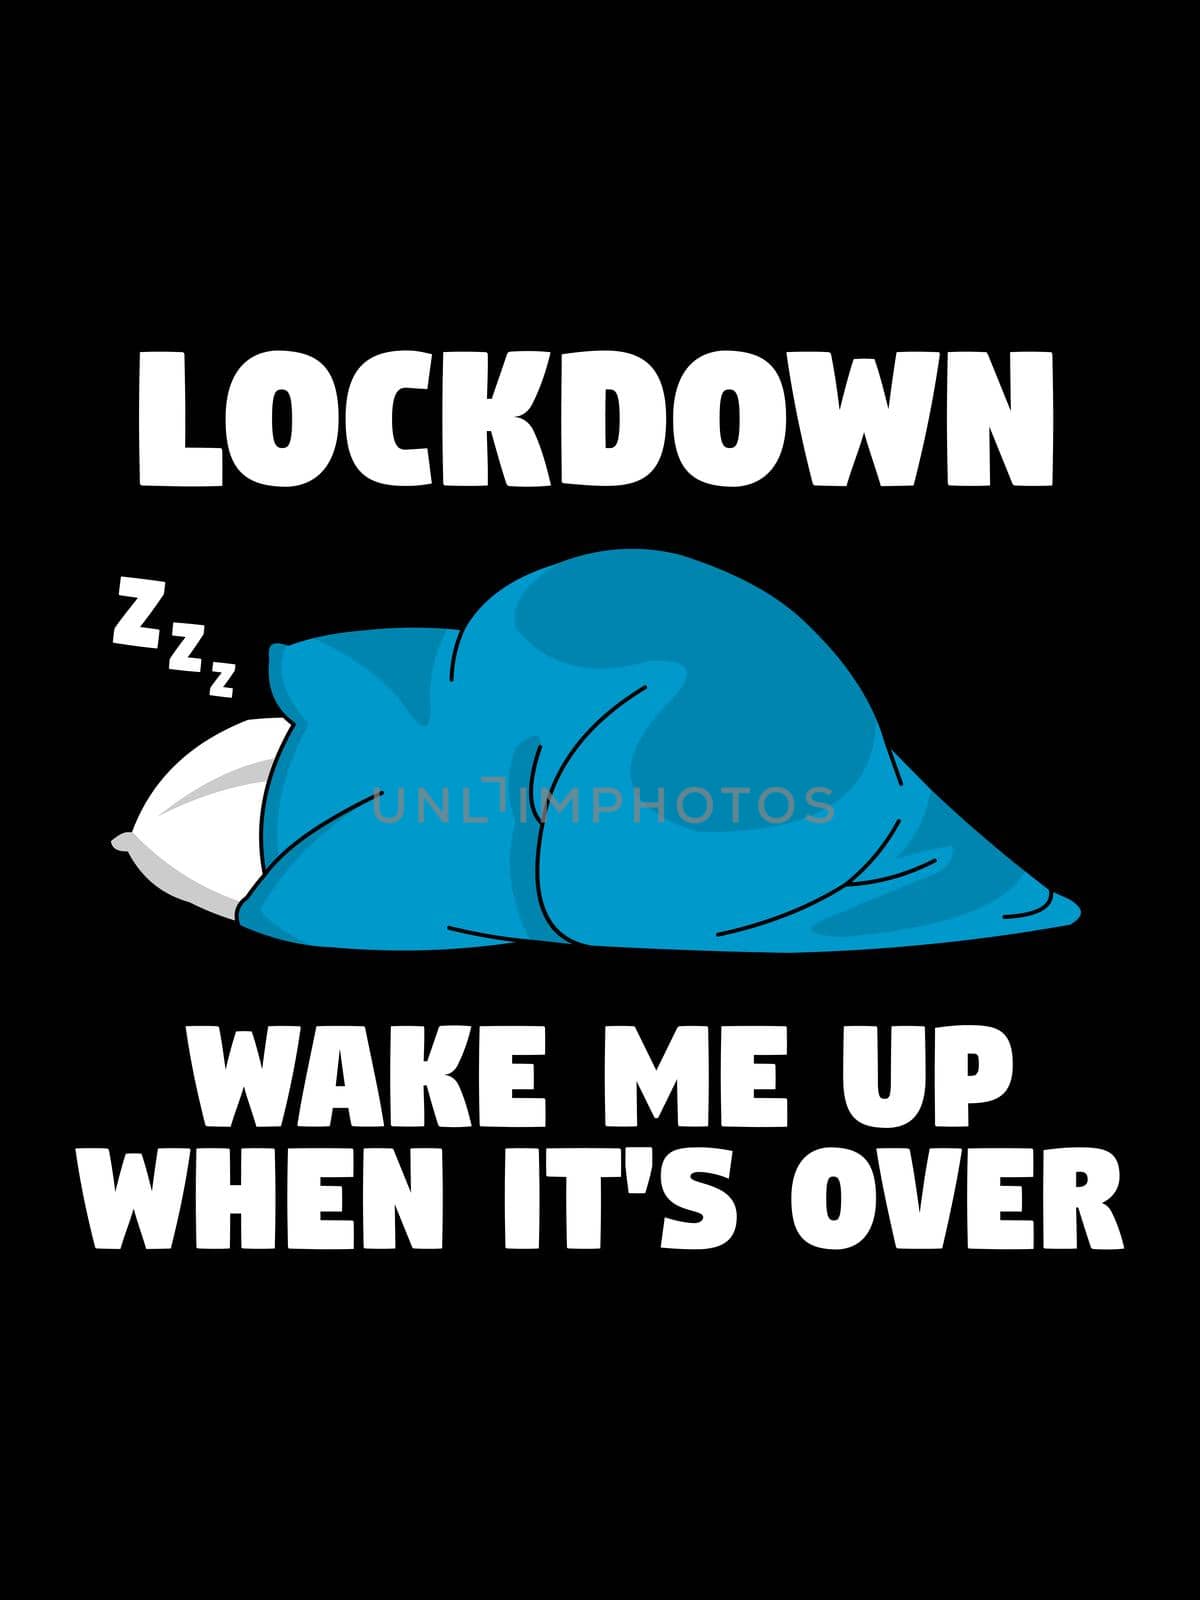 Lockdown wake me up when it's over